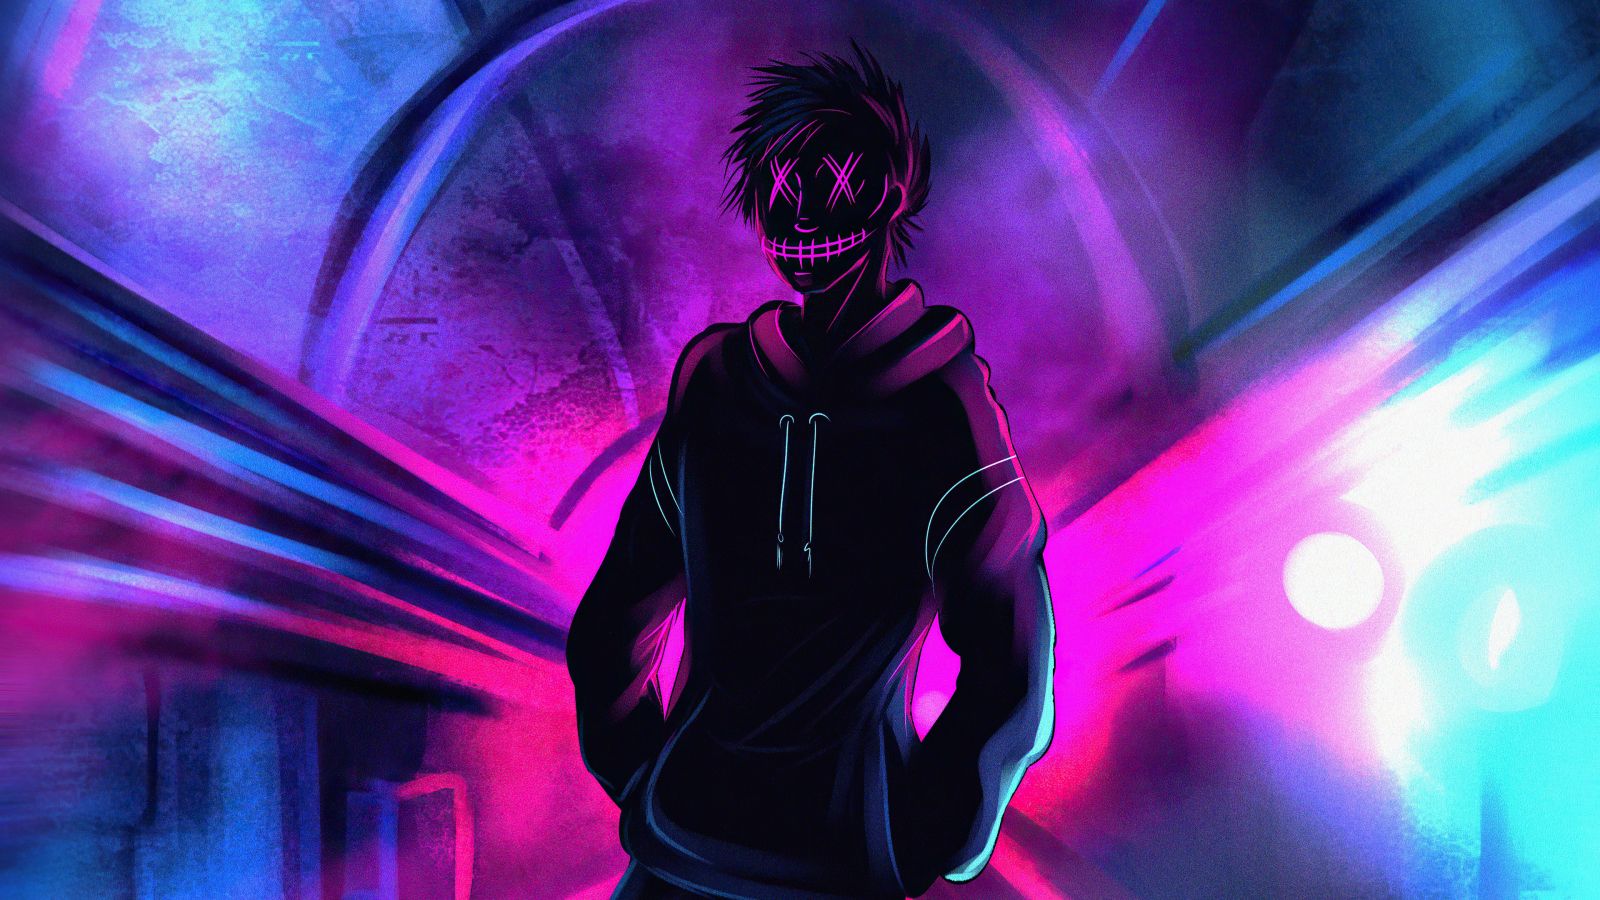 Cool Anonymous Neon Boy 1600x900 Resolution Wallpaper, HD Artist 4K Wallpaper, Image, Photo and Background